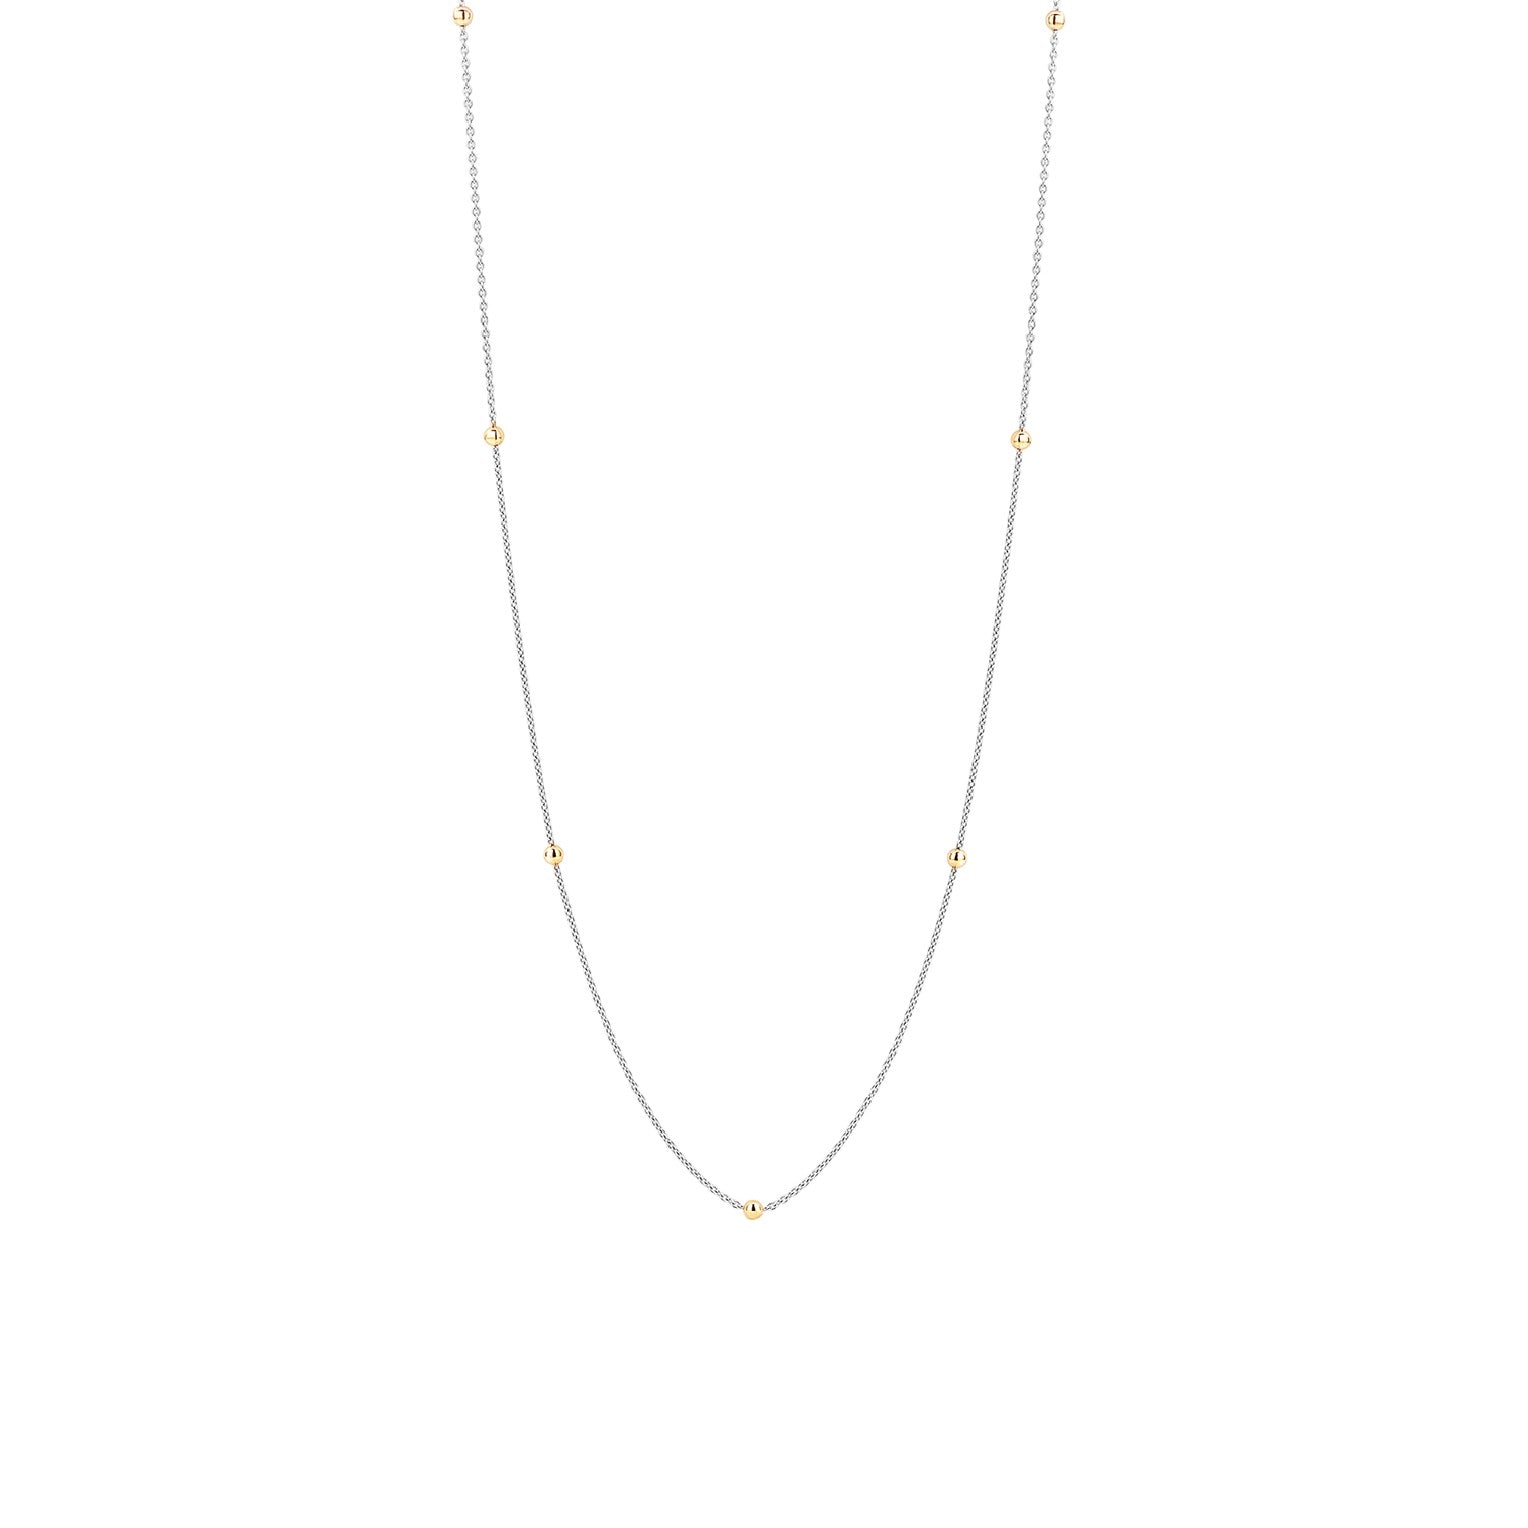 Golden Bead by the Yard Necklace